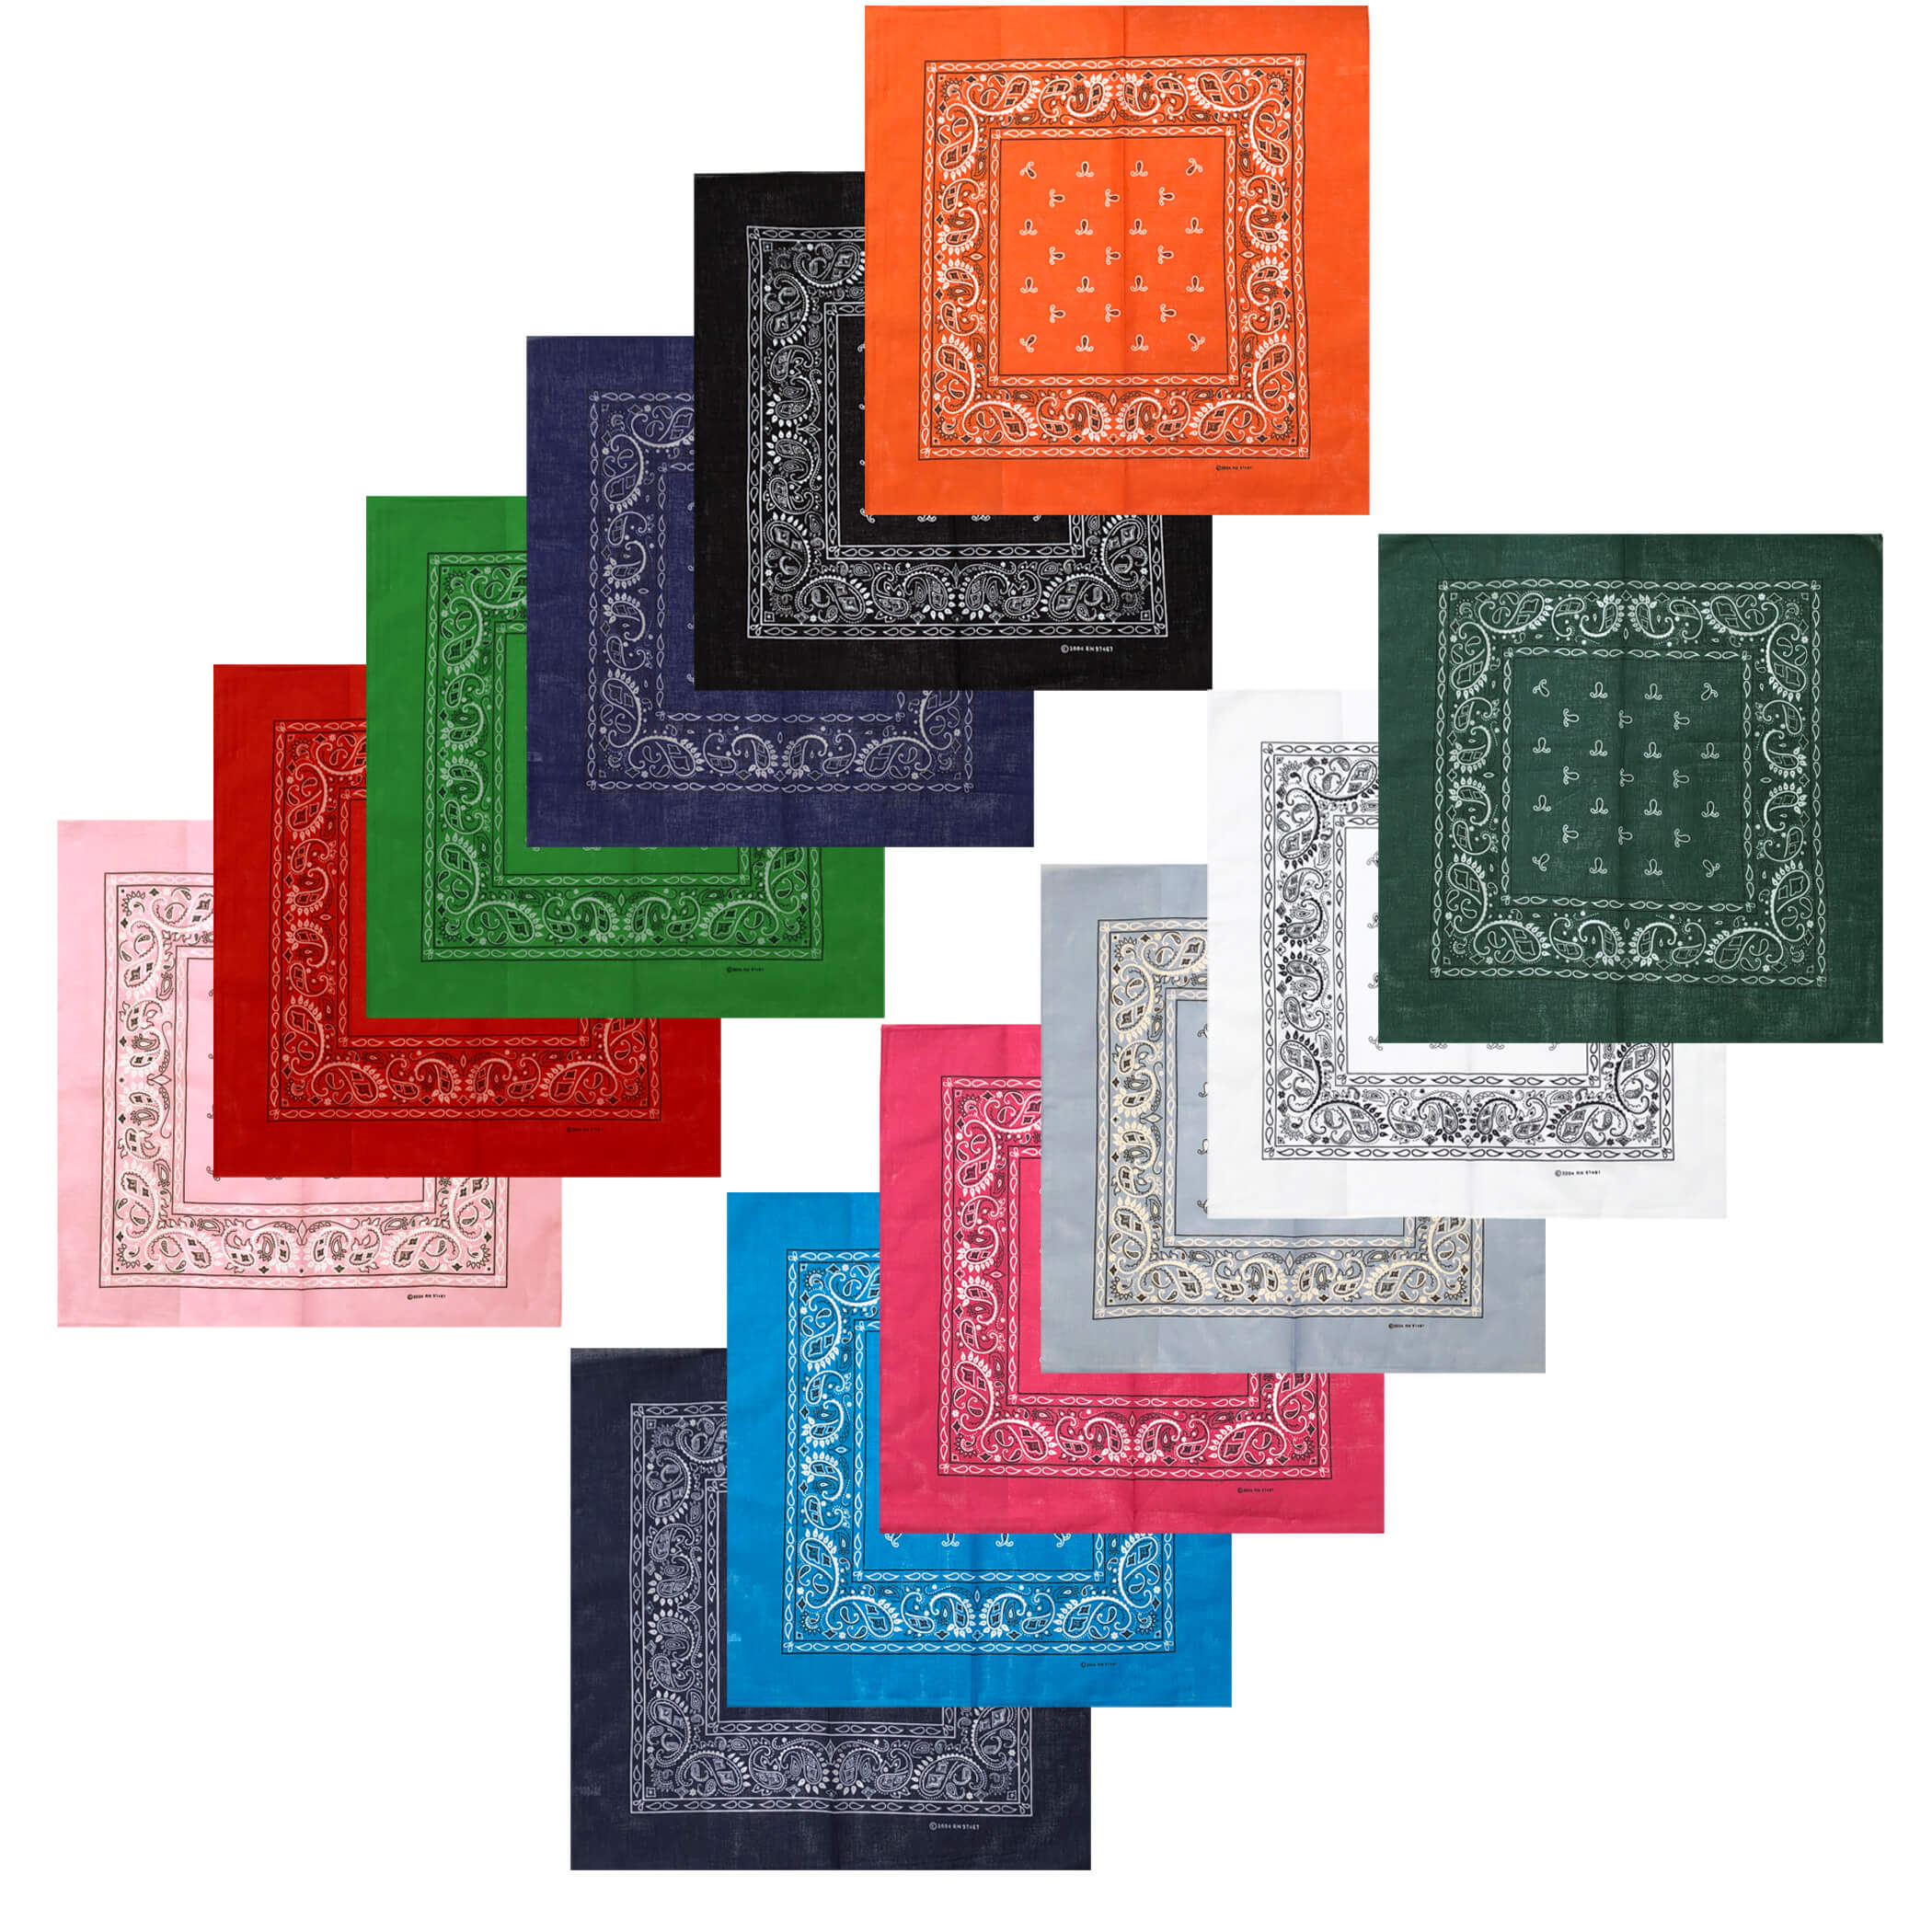 Unisex 100% Cotton Multi-Purpose Bandana Head Wrap Multi color 6 pieces pack. each pack includes 6 Assorted Colors(Random from Images) - image 1 of 1